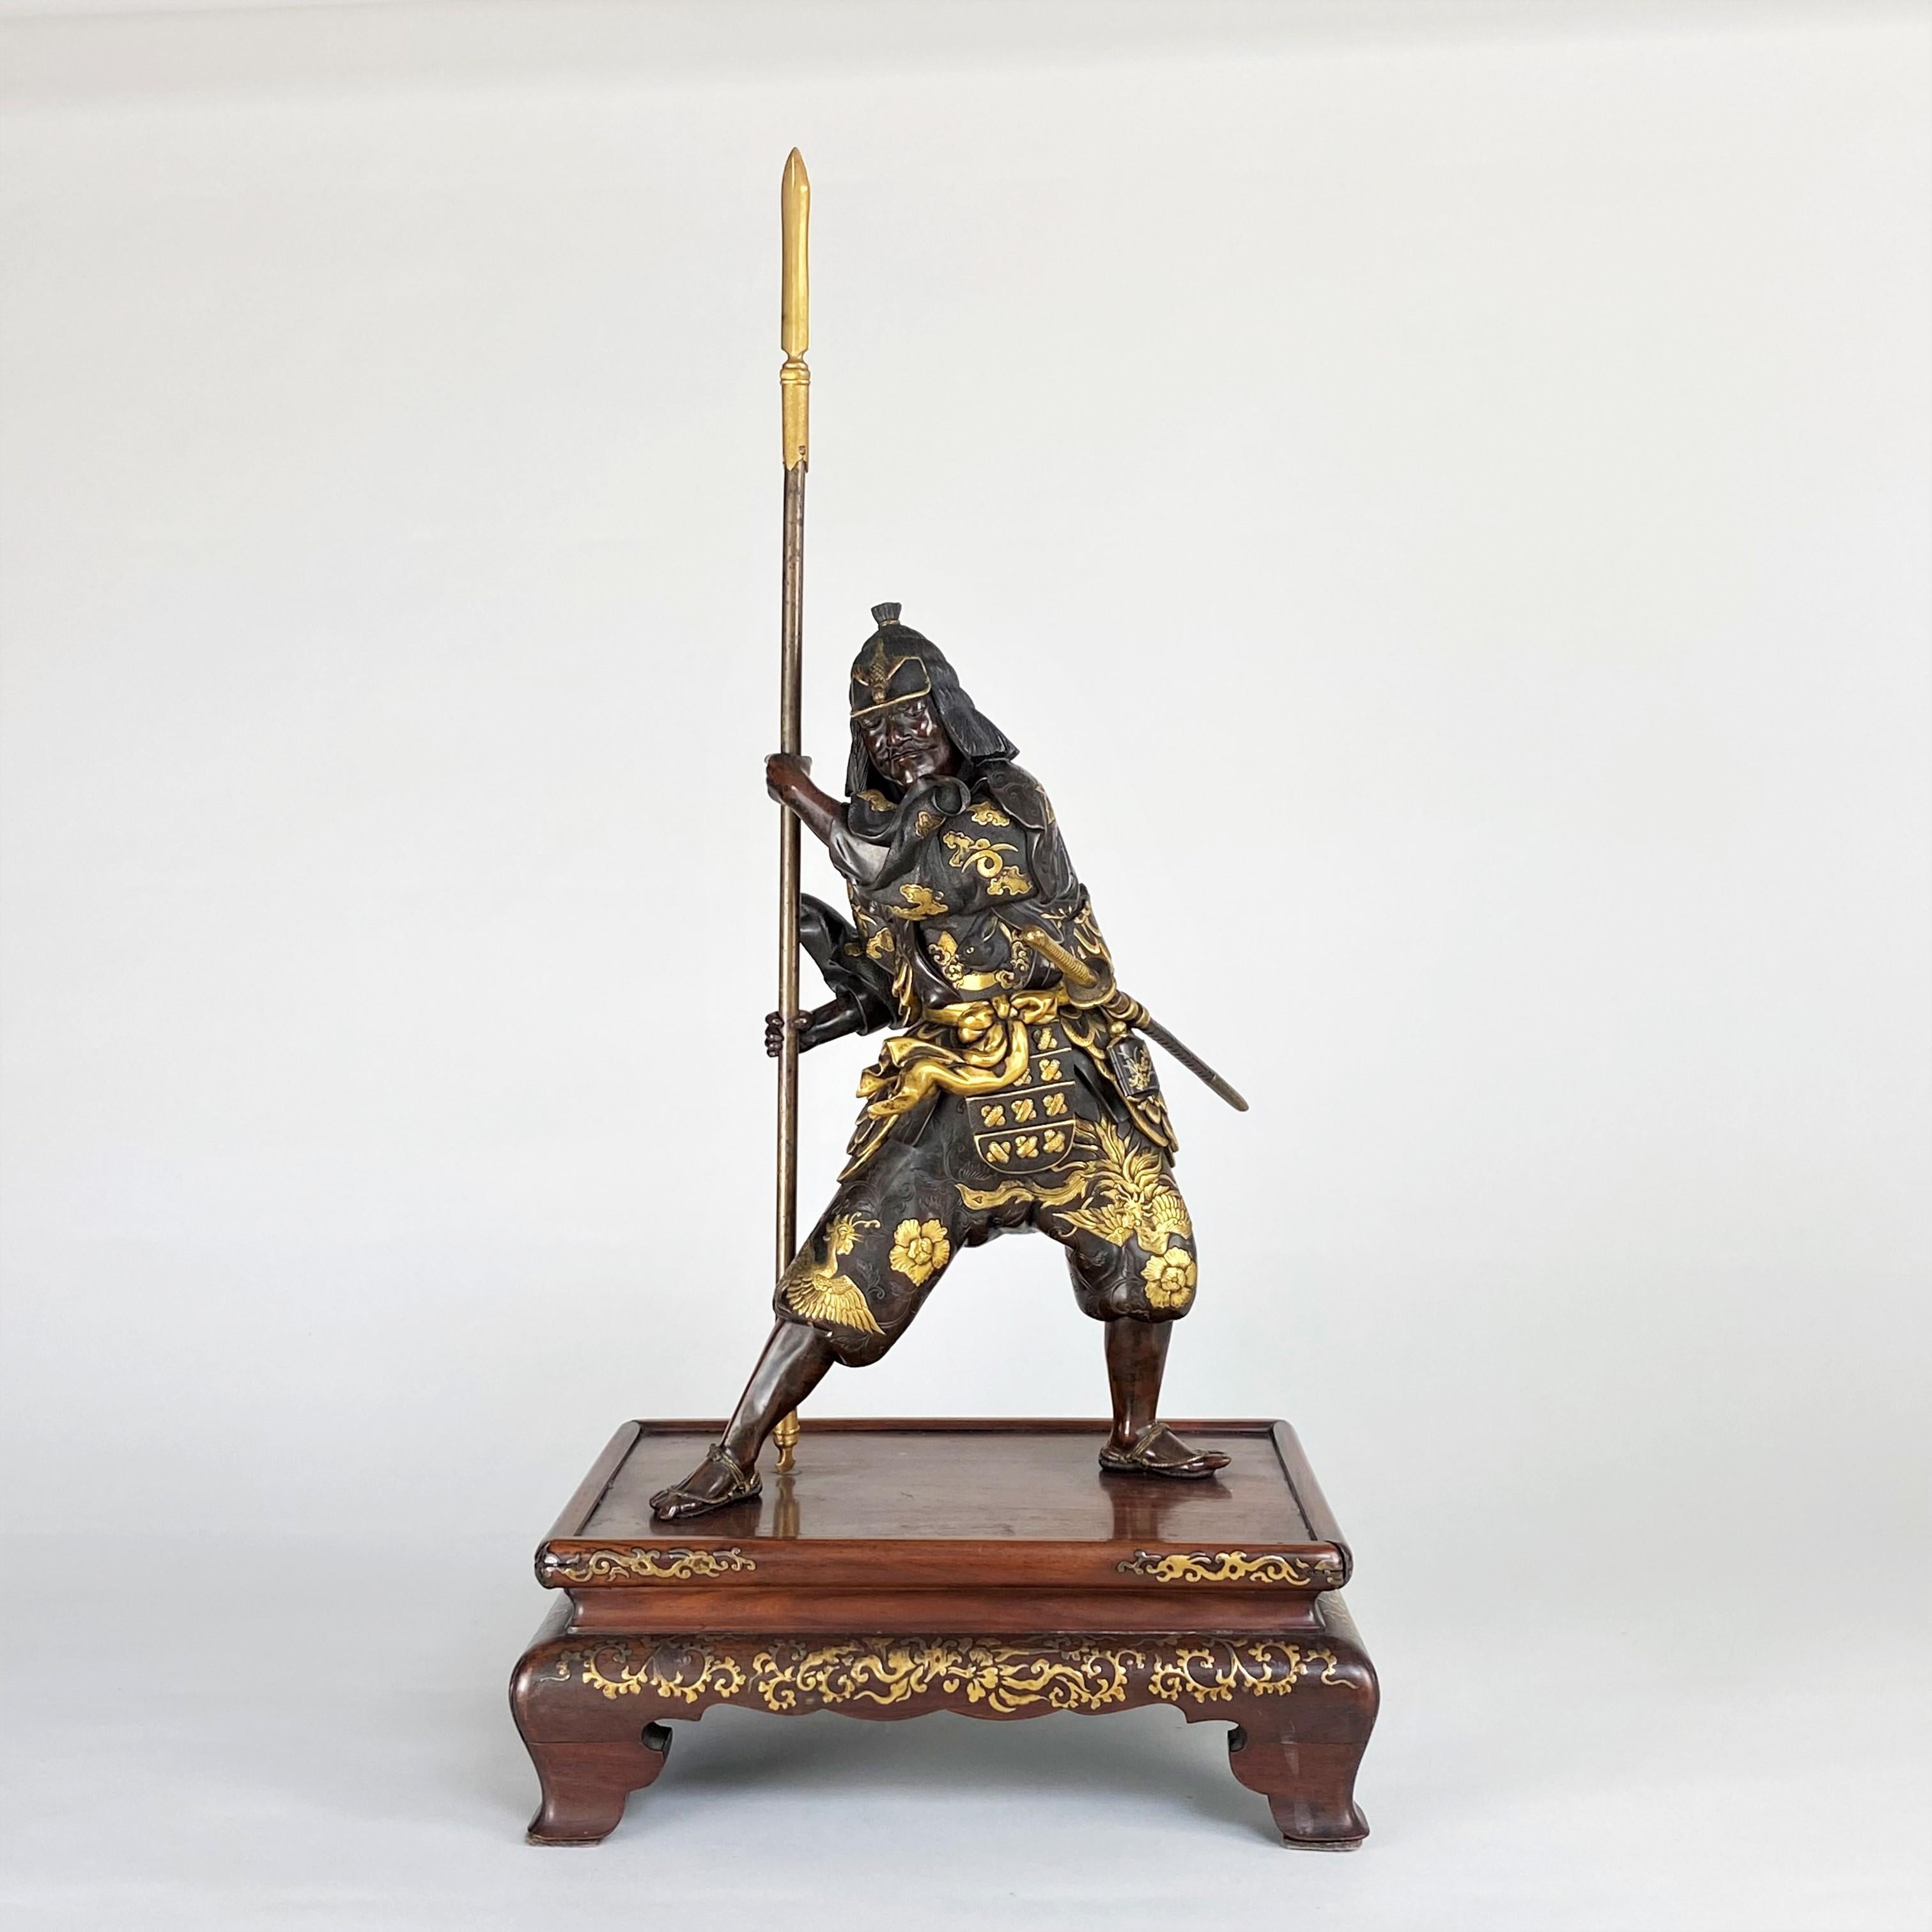 A wonderful Japanese Meiji-era, (1868 - 1912) Bronze Okimono depicting a Samurai. Signed by Miyao and with the trademark, fine quality wood and Gold lacquer stand, the figure stands in combative pose. He is holding his Yari (Long Spear of the